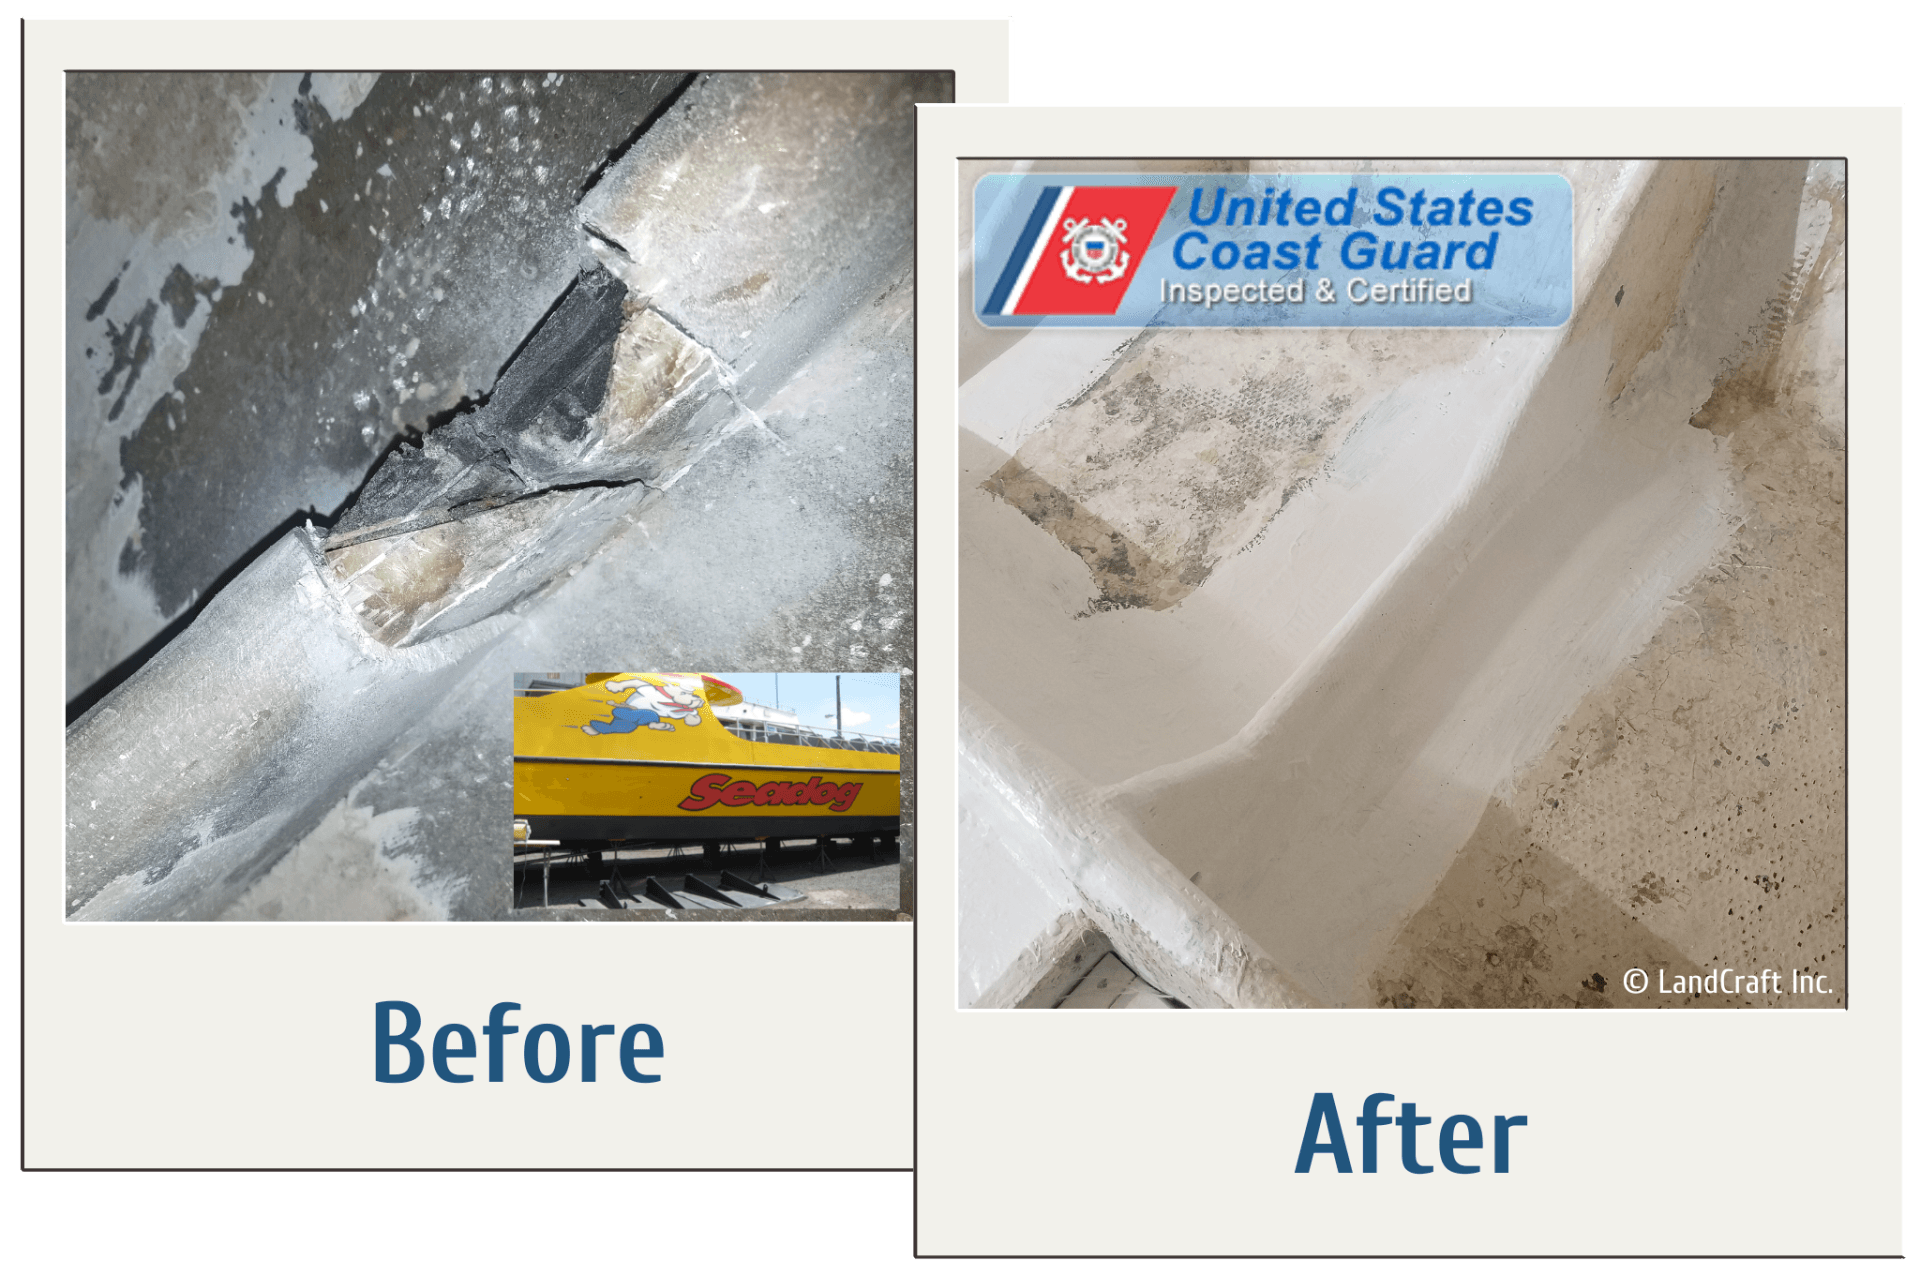 Before and after of major structural damage repair on a commercial passenger vessel